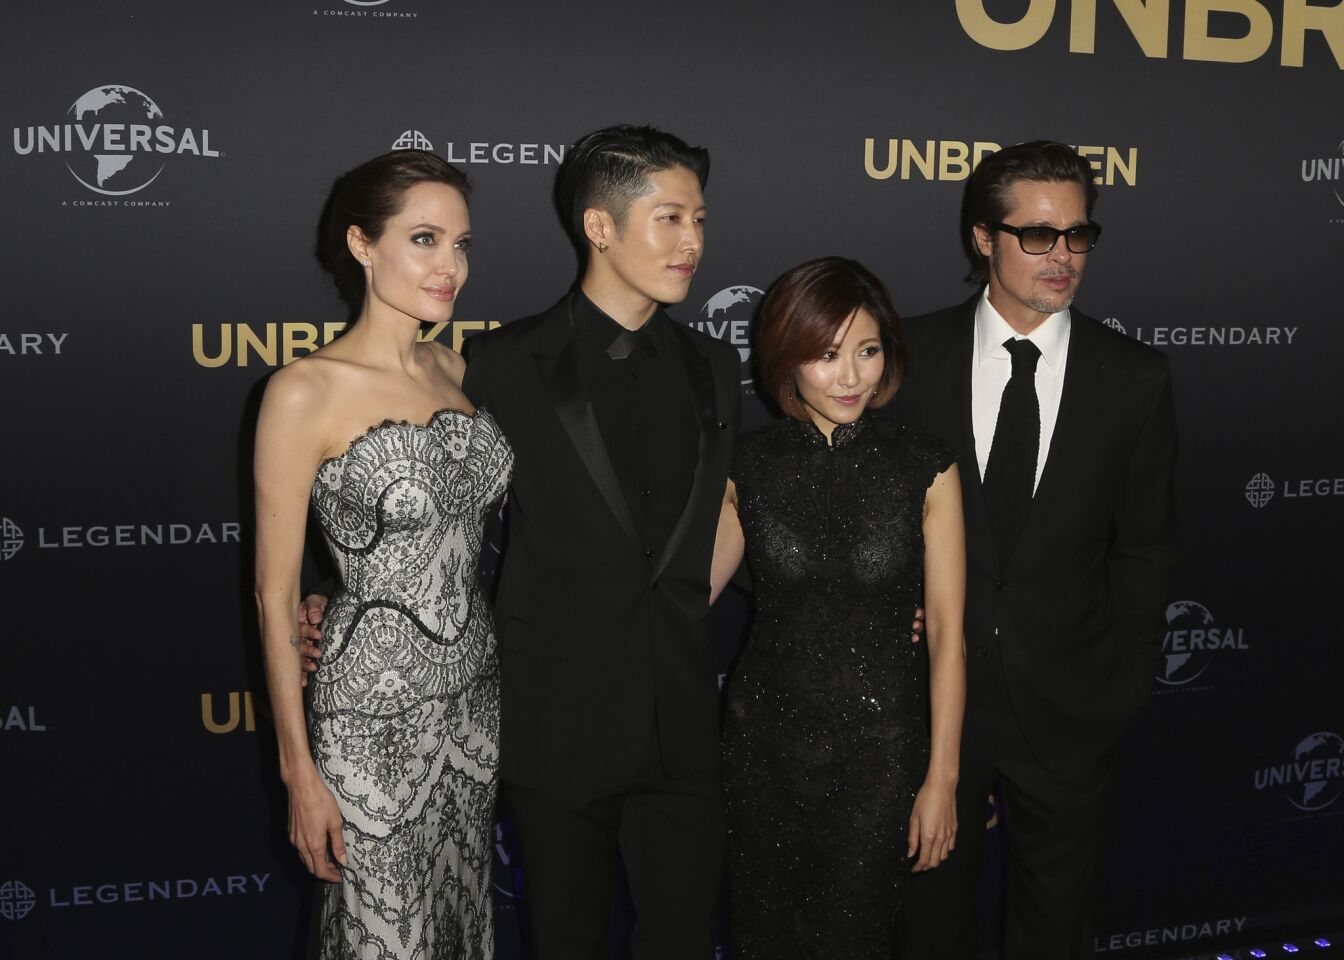 Angelina Jolie, left, director of "Unbroken," poses with Miyavi, second from left, Melody Ishihara and Brad Pitt at the film's world premiere, in Sydney, Australia, on Nov. 17, 2014.